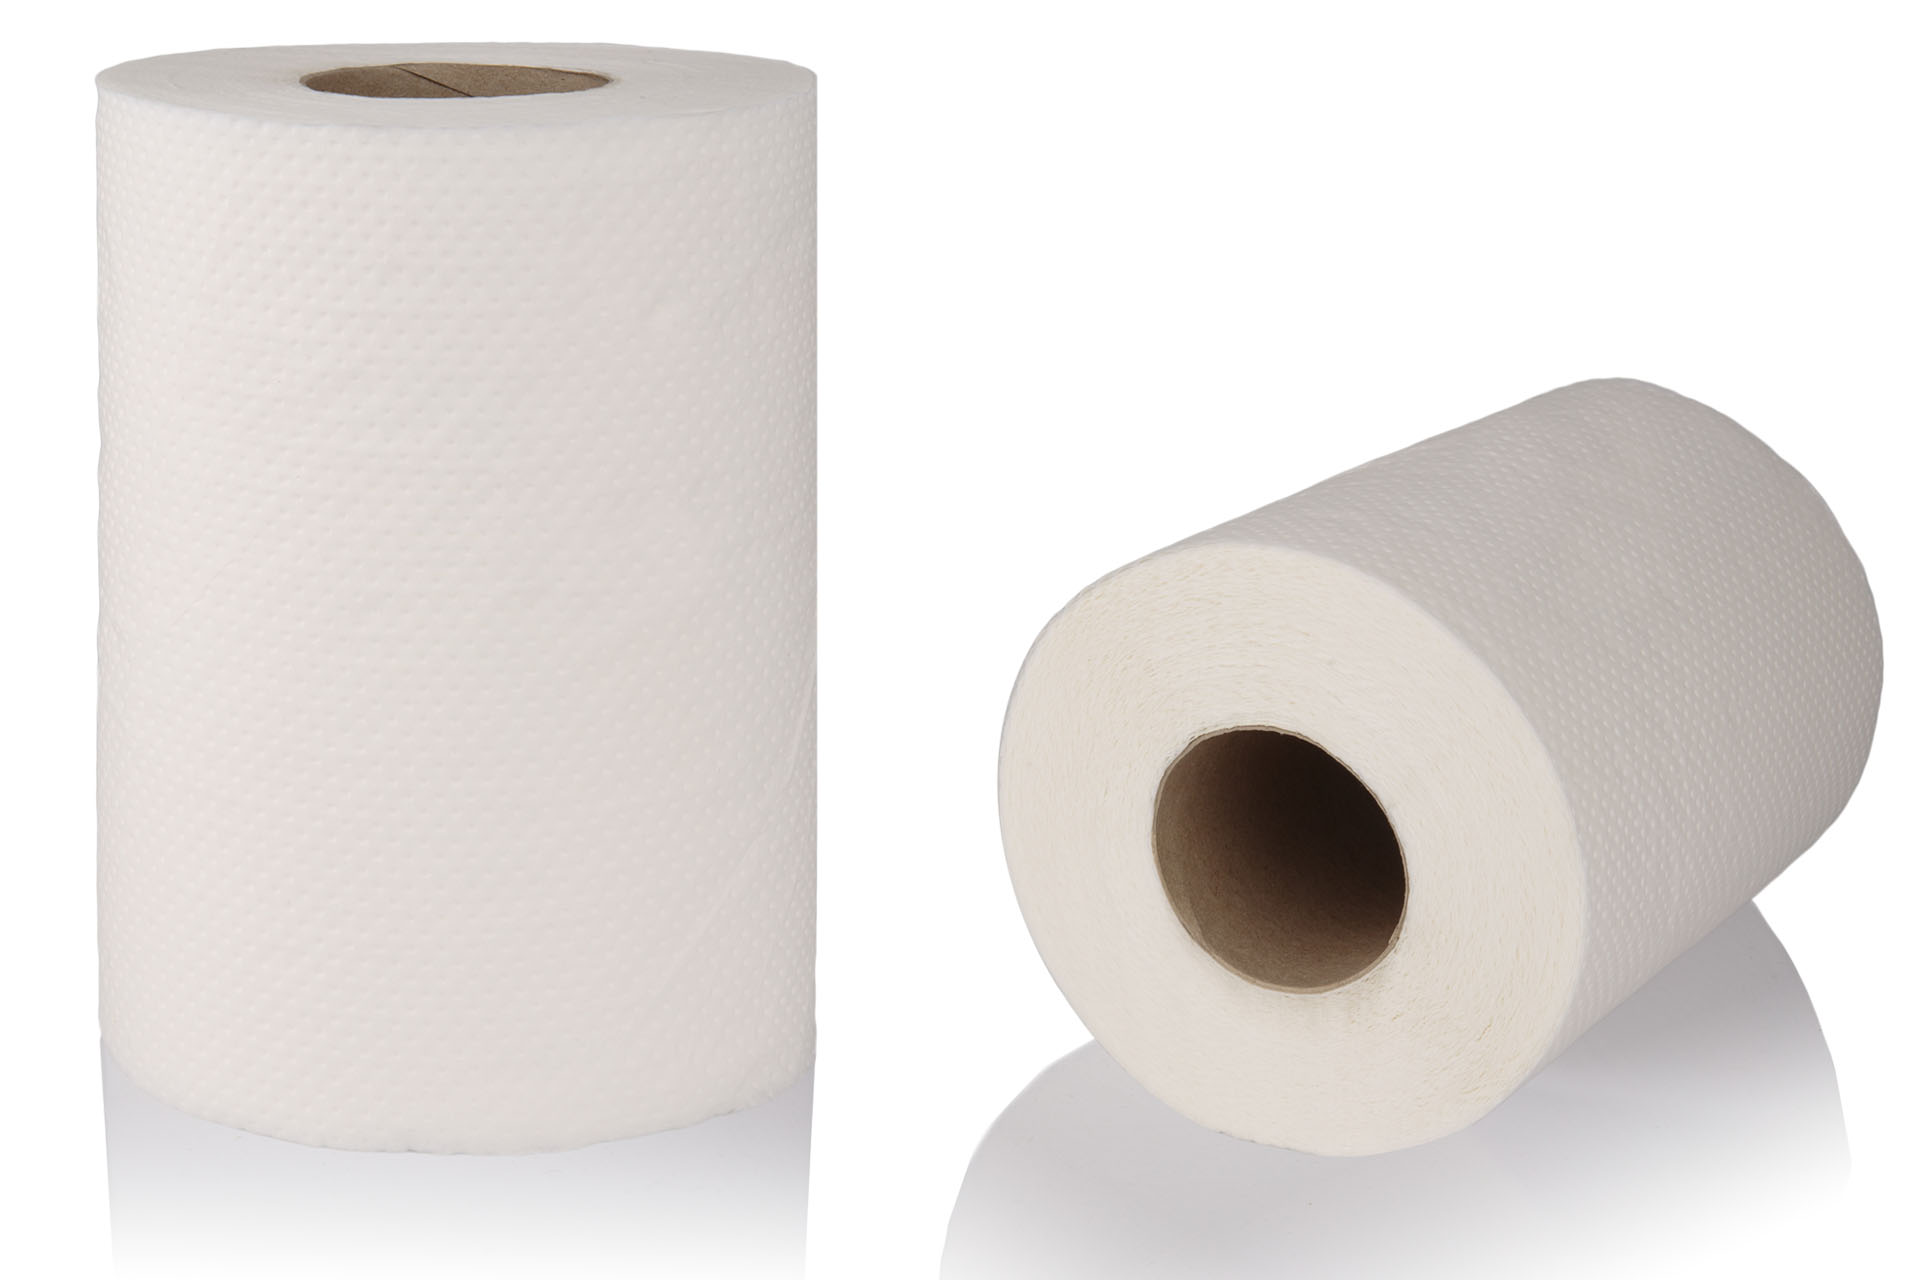 Shadowless photos of paper towels, kitchen rolls